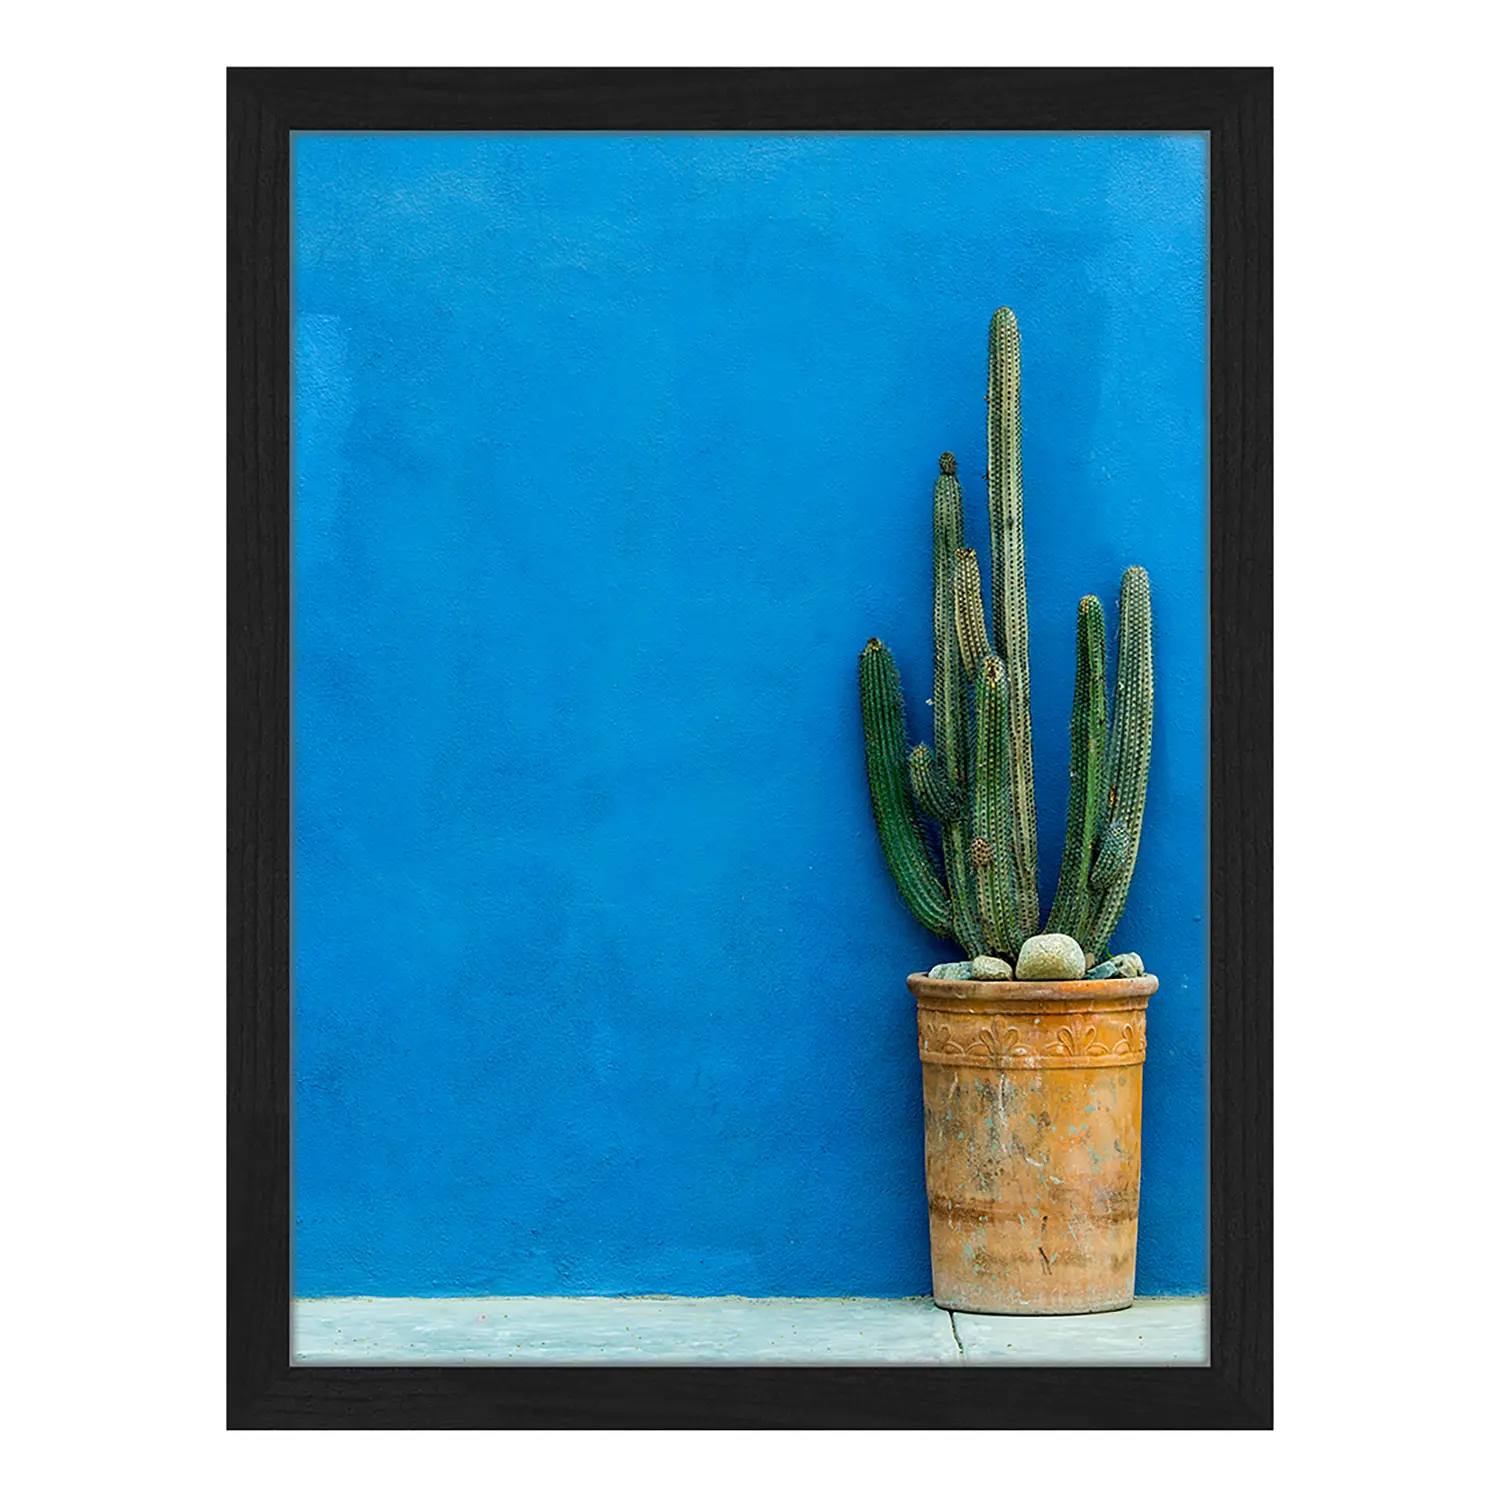 Bild Blue Wall with Cactus